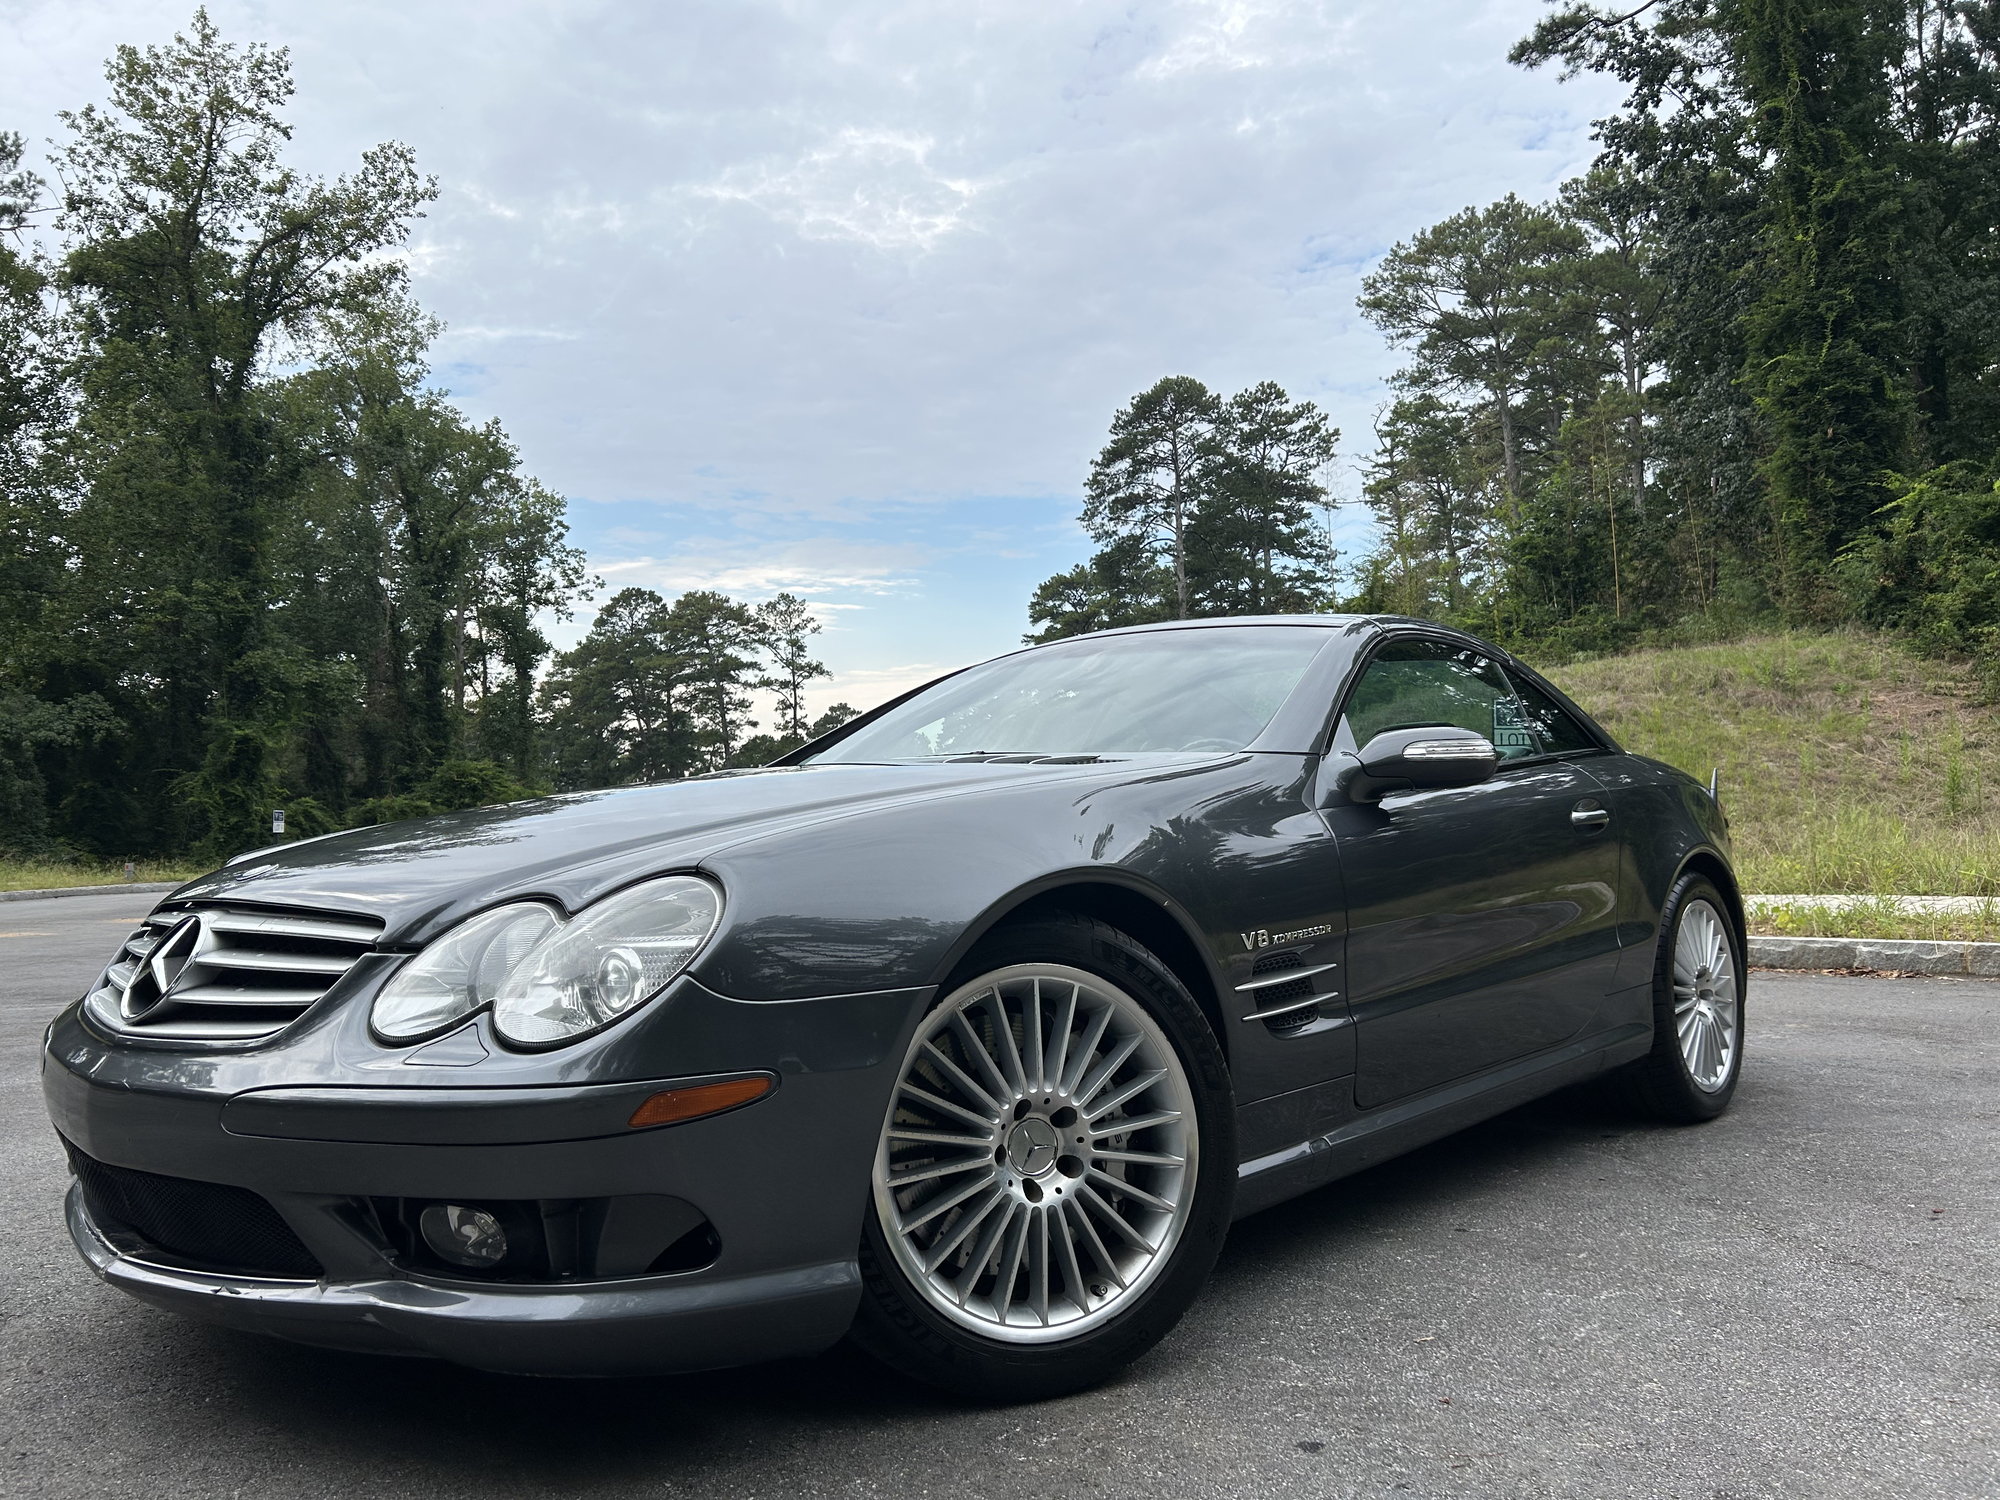 2004 Mercedes-Benz SL55 AMG - Stunning 2004 SL55 AMG looking for a new home - Used - Atlanta, GA 30342, United States